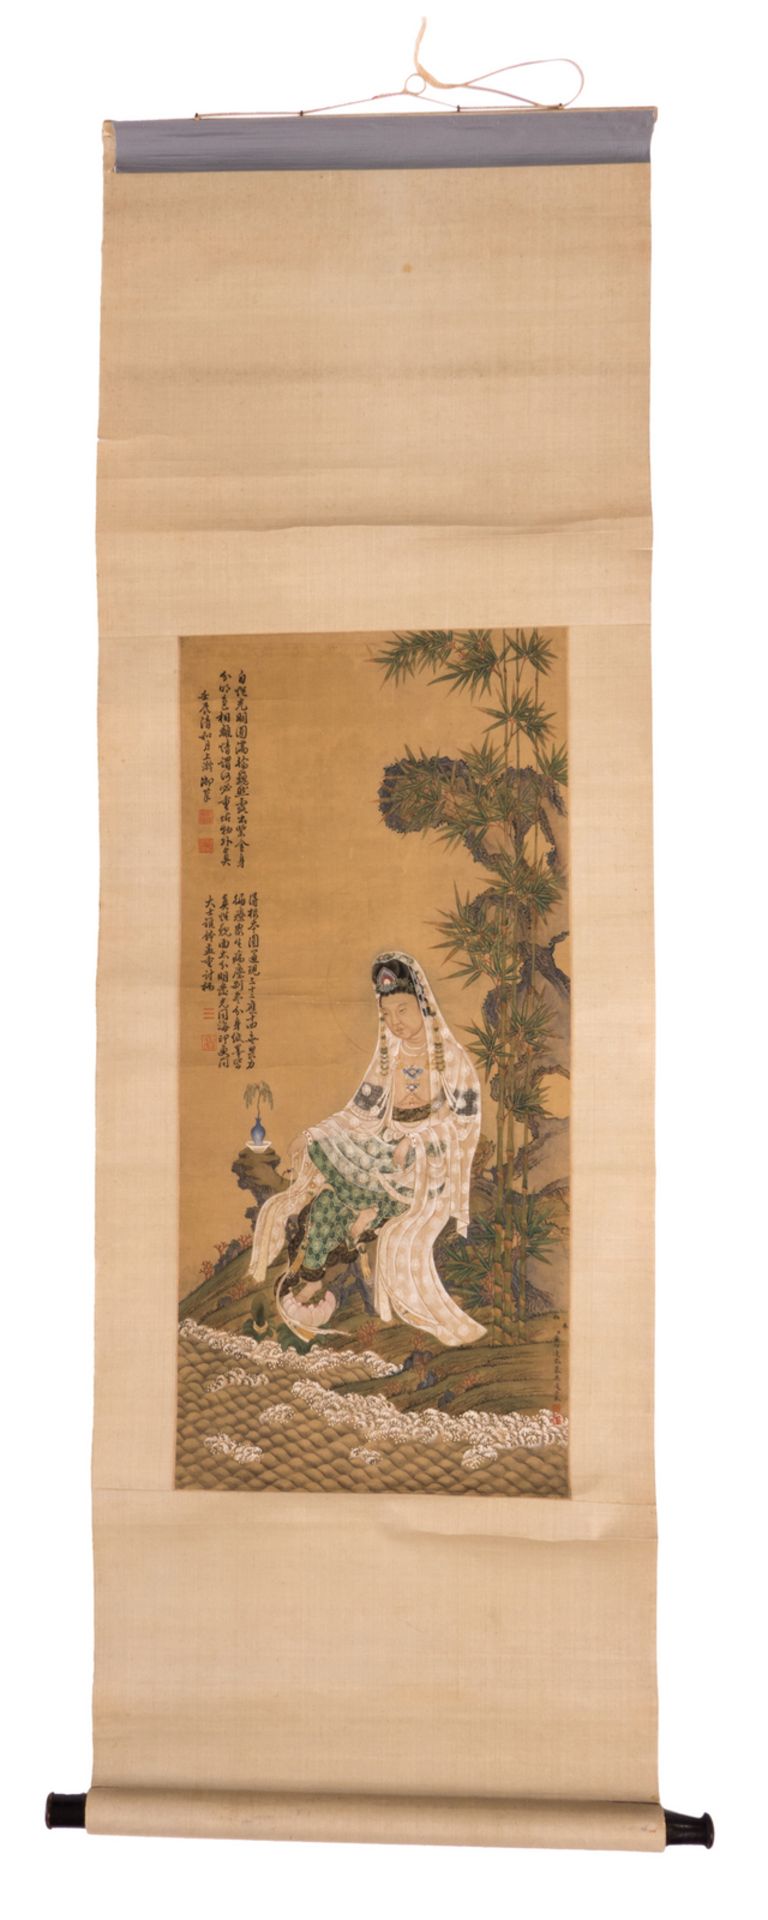 A Chinese scroll depicting Guanyin situated in a landscape near a rippling river, 38 x 84 - 54 x 168 - Bild 2 aus 7